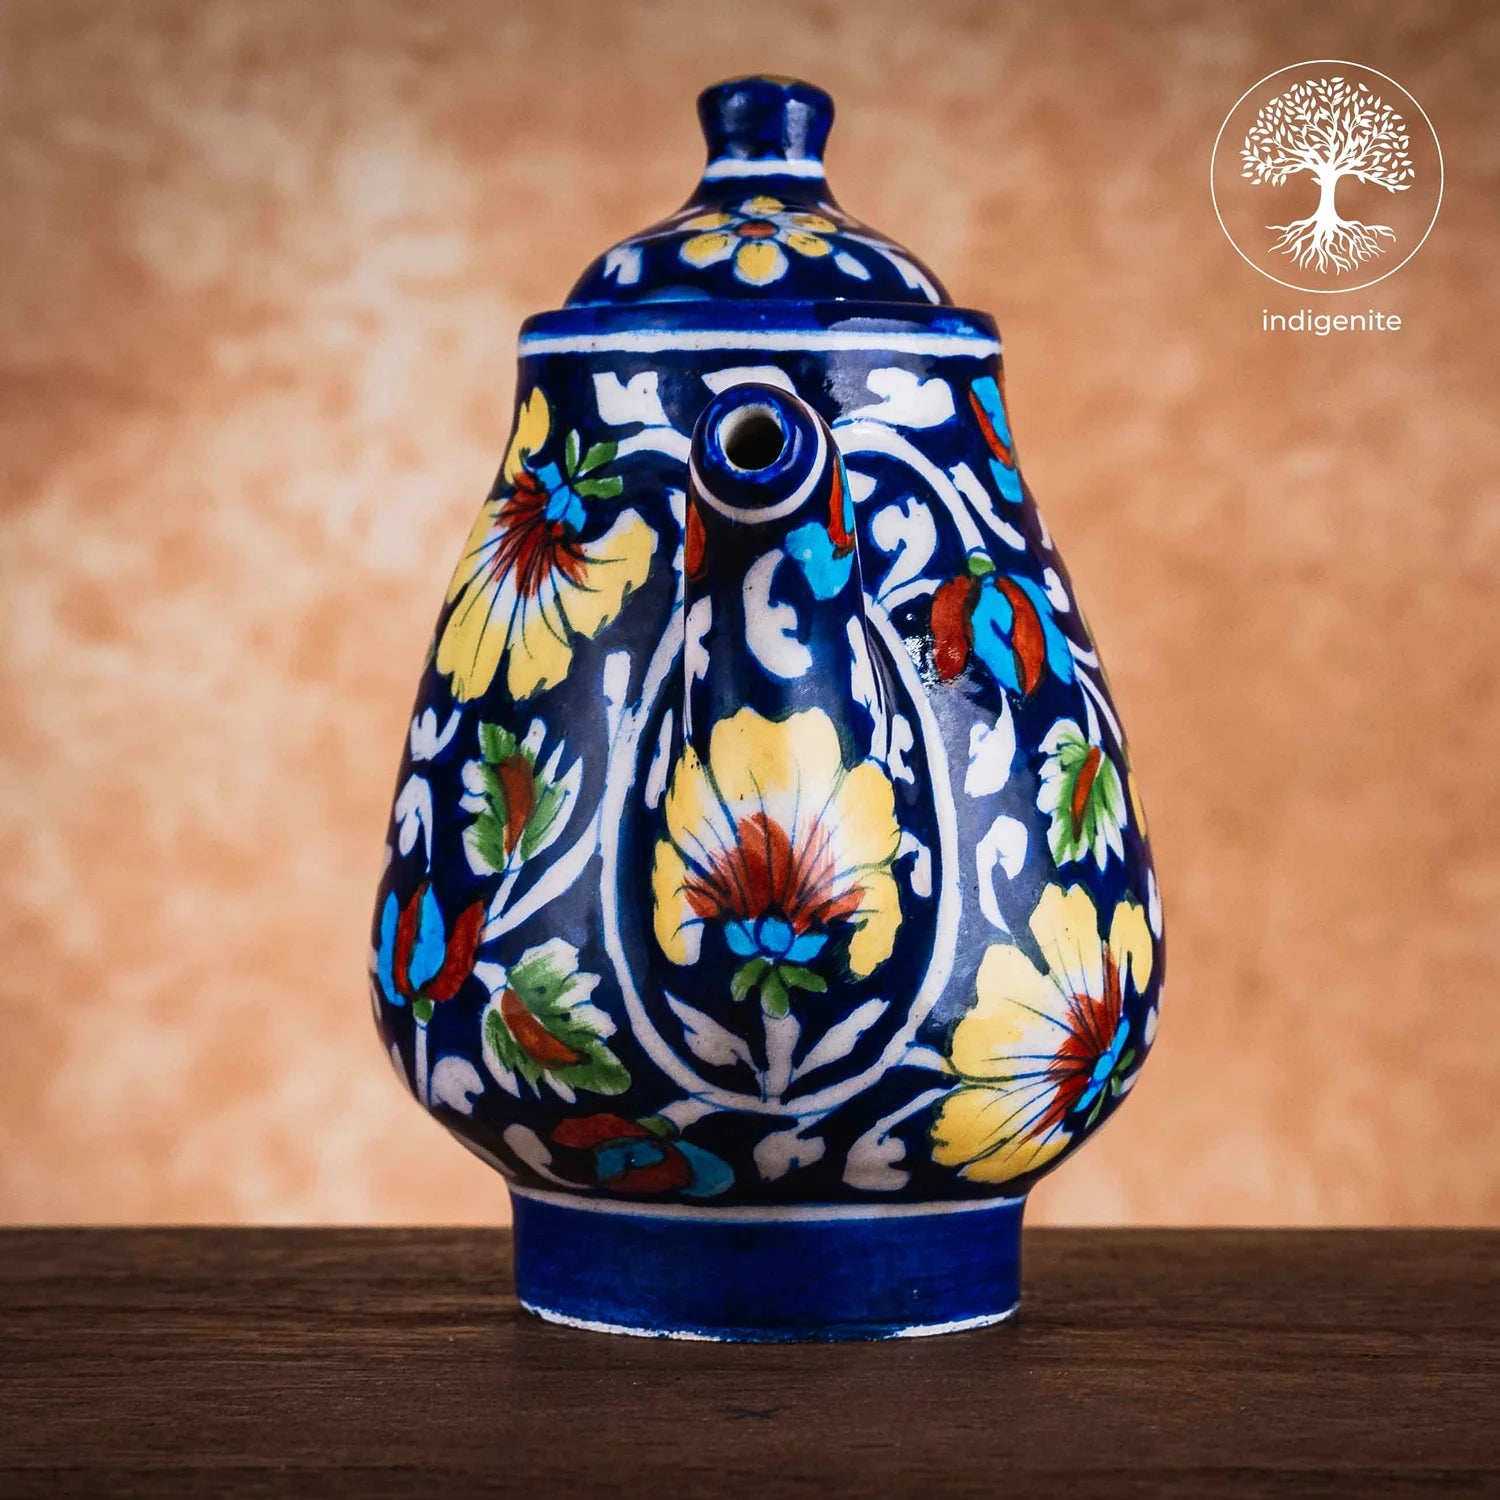 Midnight Blue and Colorful Floral Tea Pot  - Jaipur Blue Pottery